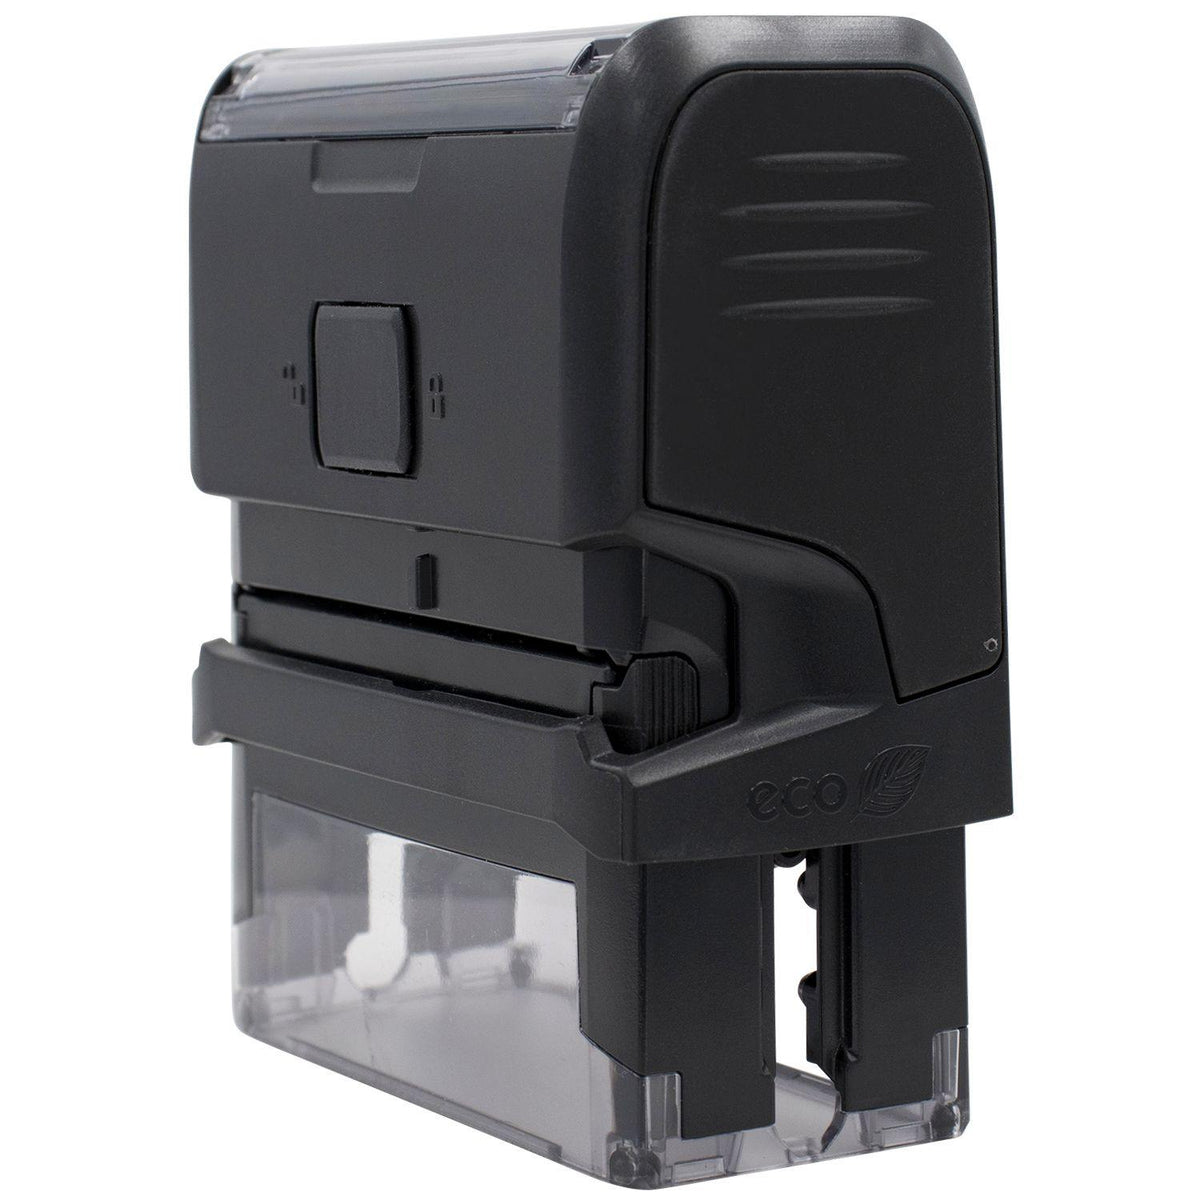 Large Self-Inking Official Use Only Stamp - Engineer Seal Stamps - Brand_Trodat, Impression Size_Large, Stamp Type_Self-Inking Stamp, Type of Use_Office